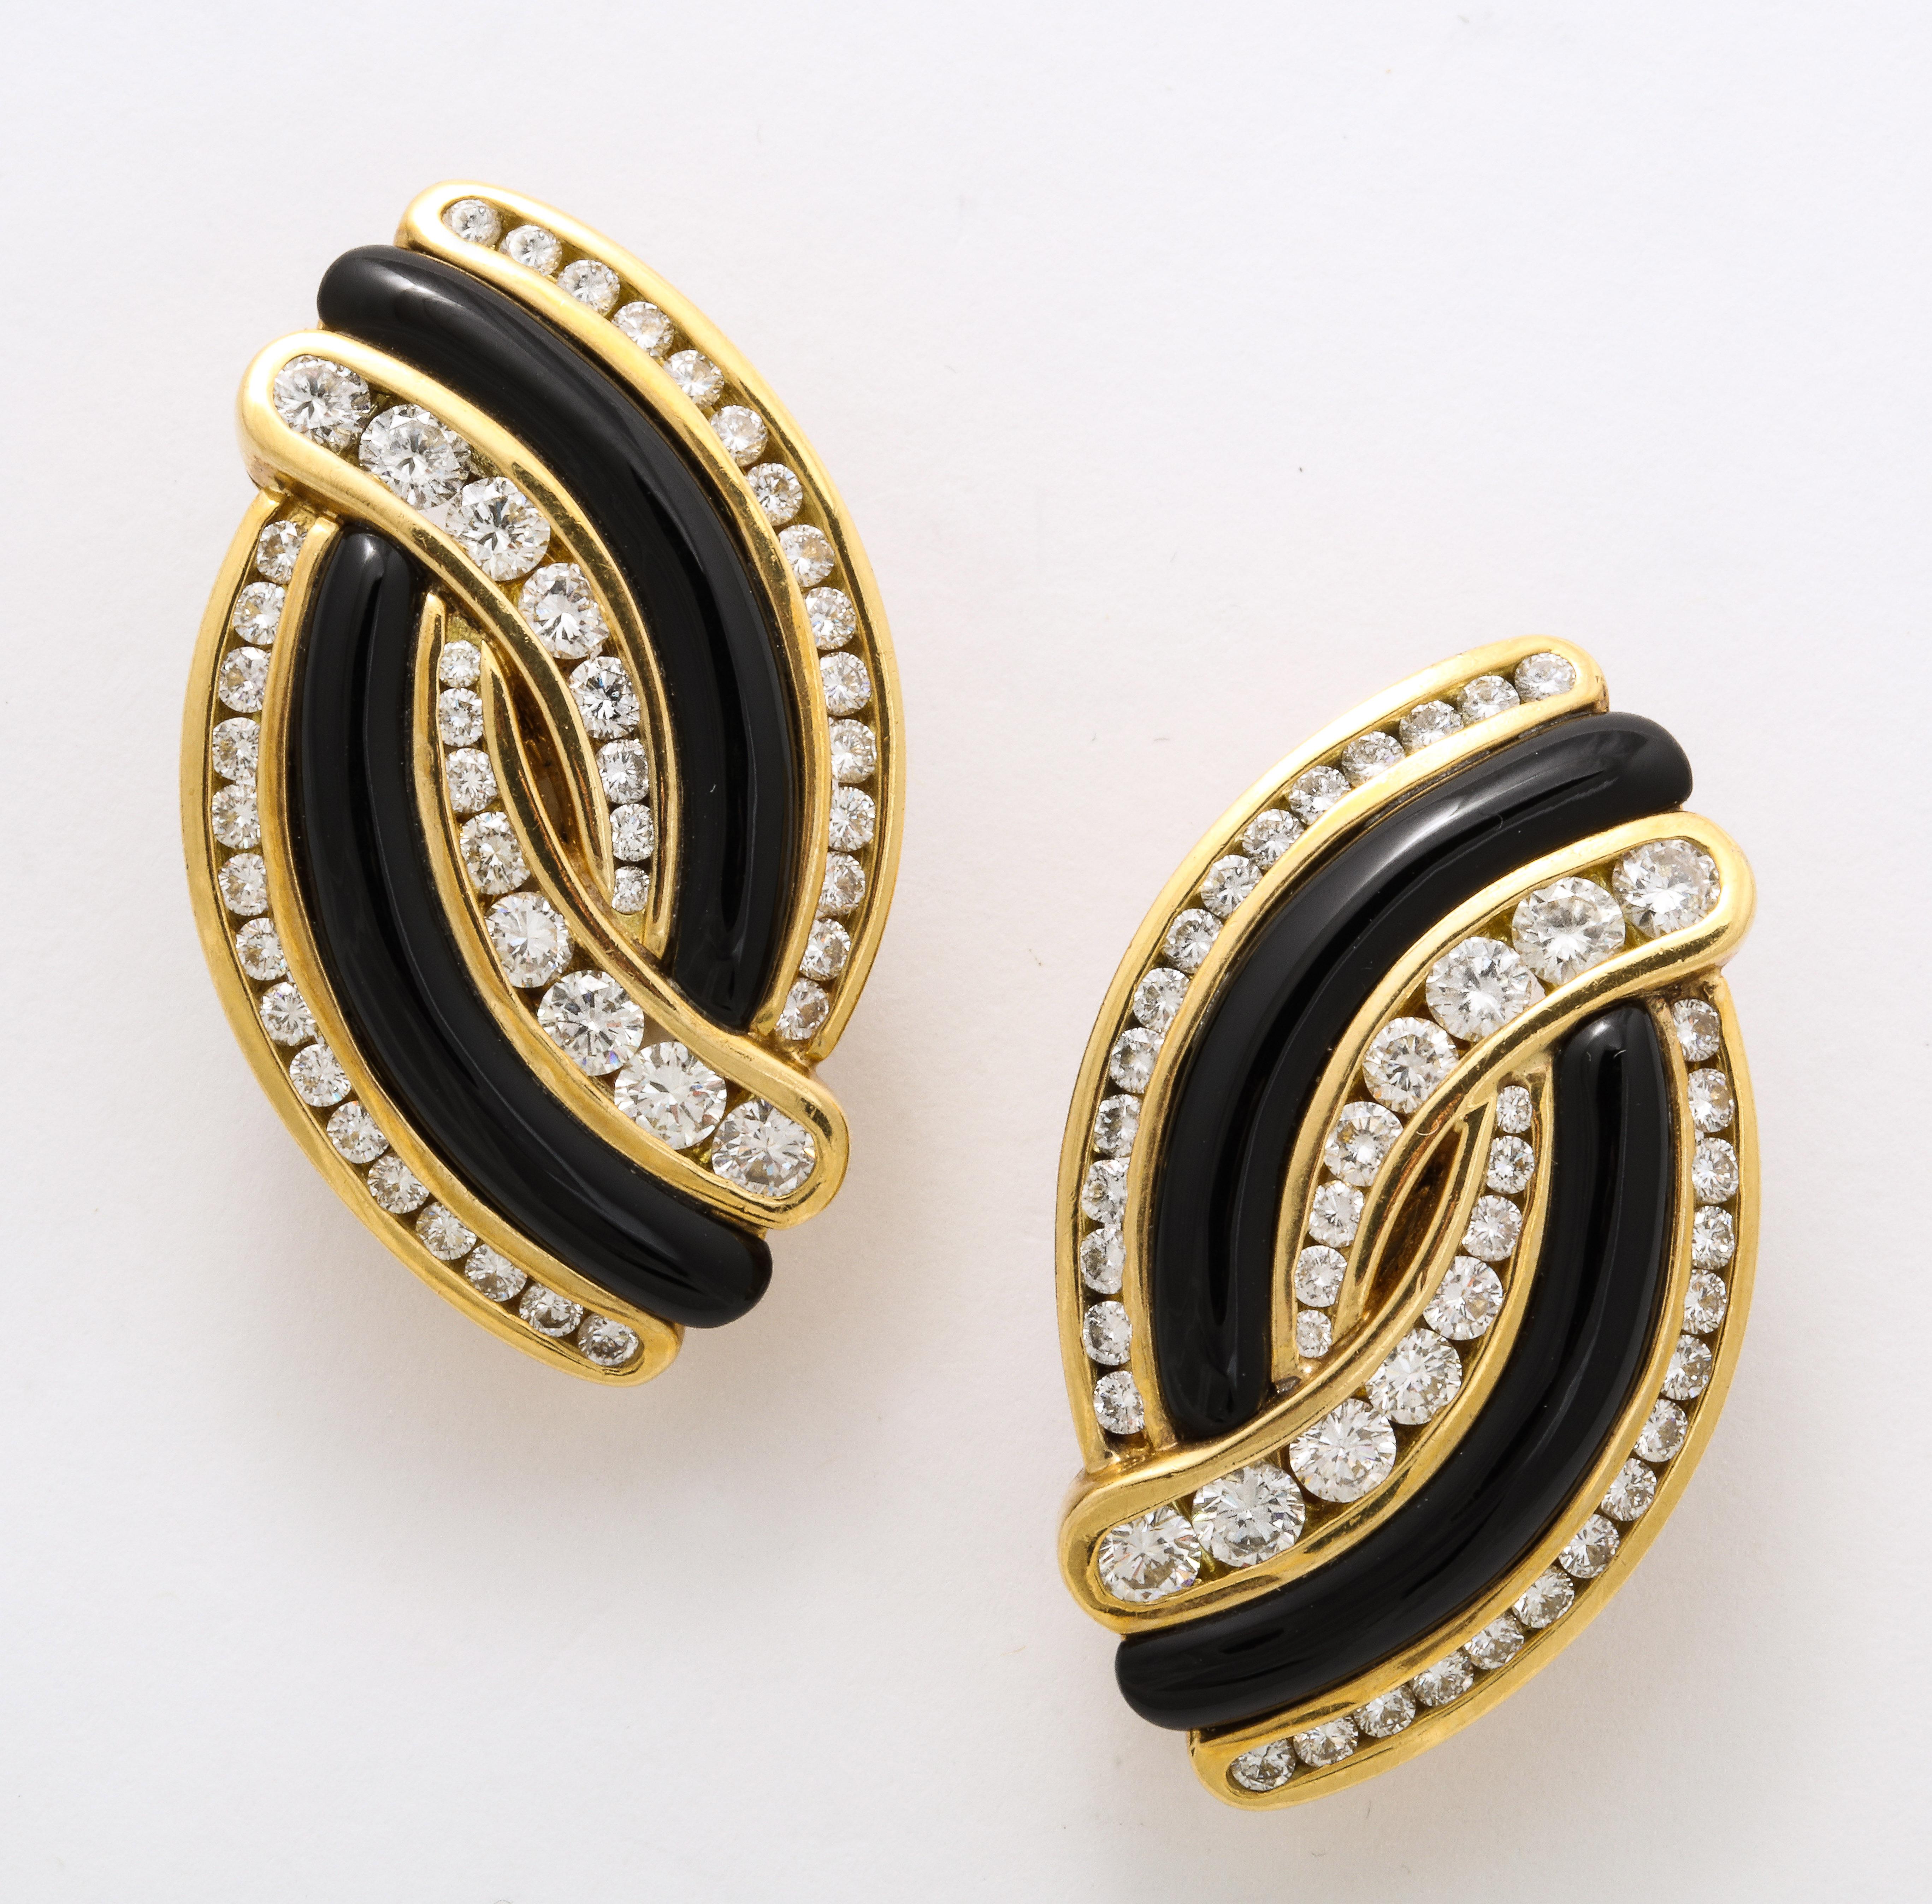 A perfectly elegant pair of 18K gold ear clips set with hand carved black jade curved elements complimented by diamond accents suitable for occasions or just shopping, lunch, and into evening. Measuring 5/8 inches x 1 1/2 inches. Weighing 43.7